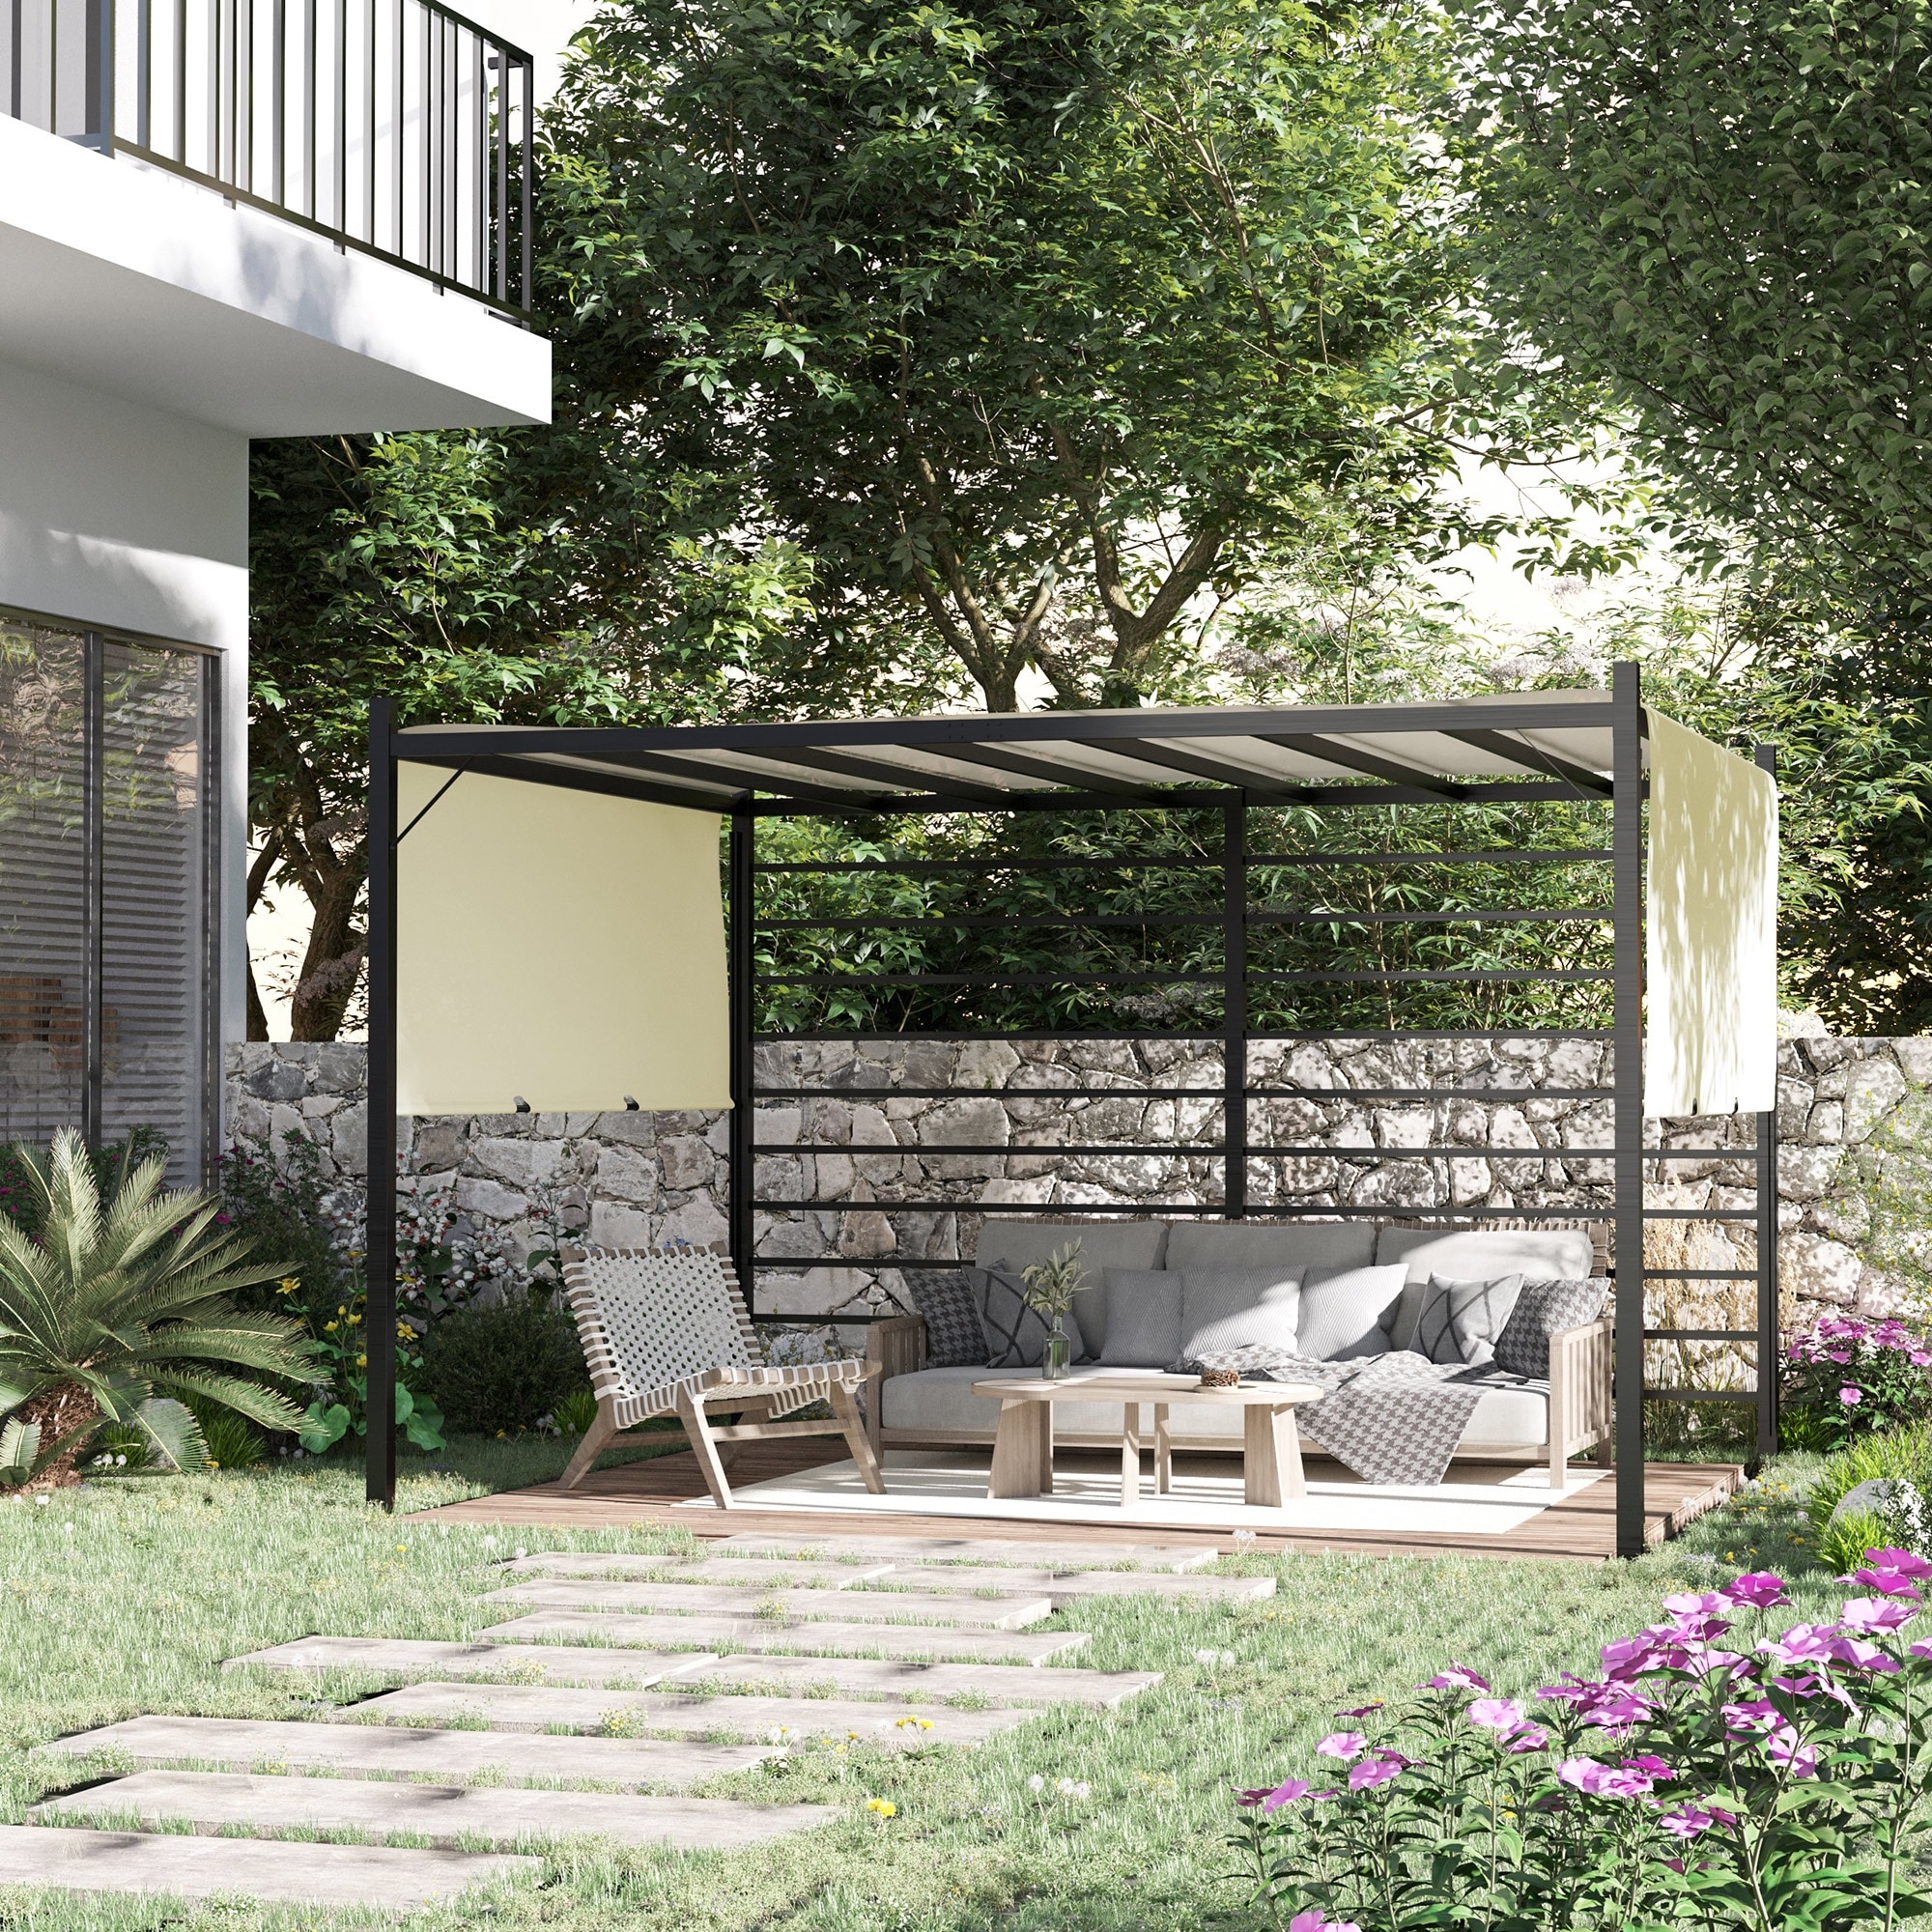 12'x10'x8' Outdoor Pergola Steel Gazebo Structure with Retractable Canopy Shades 